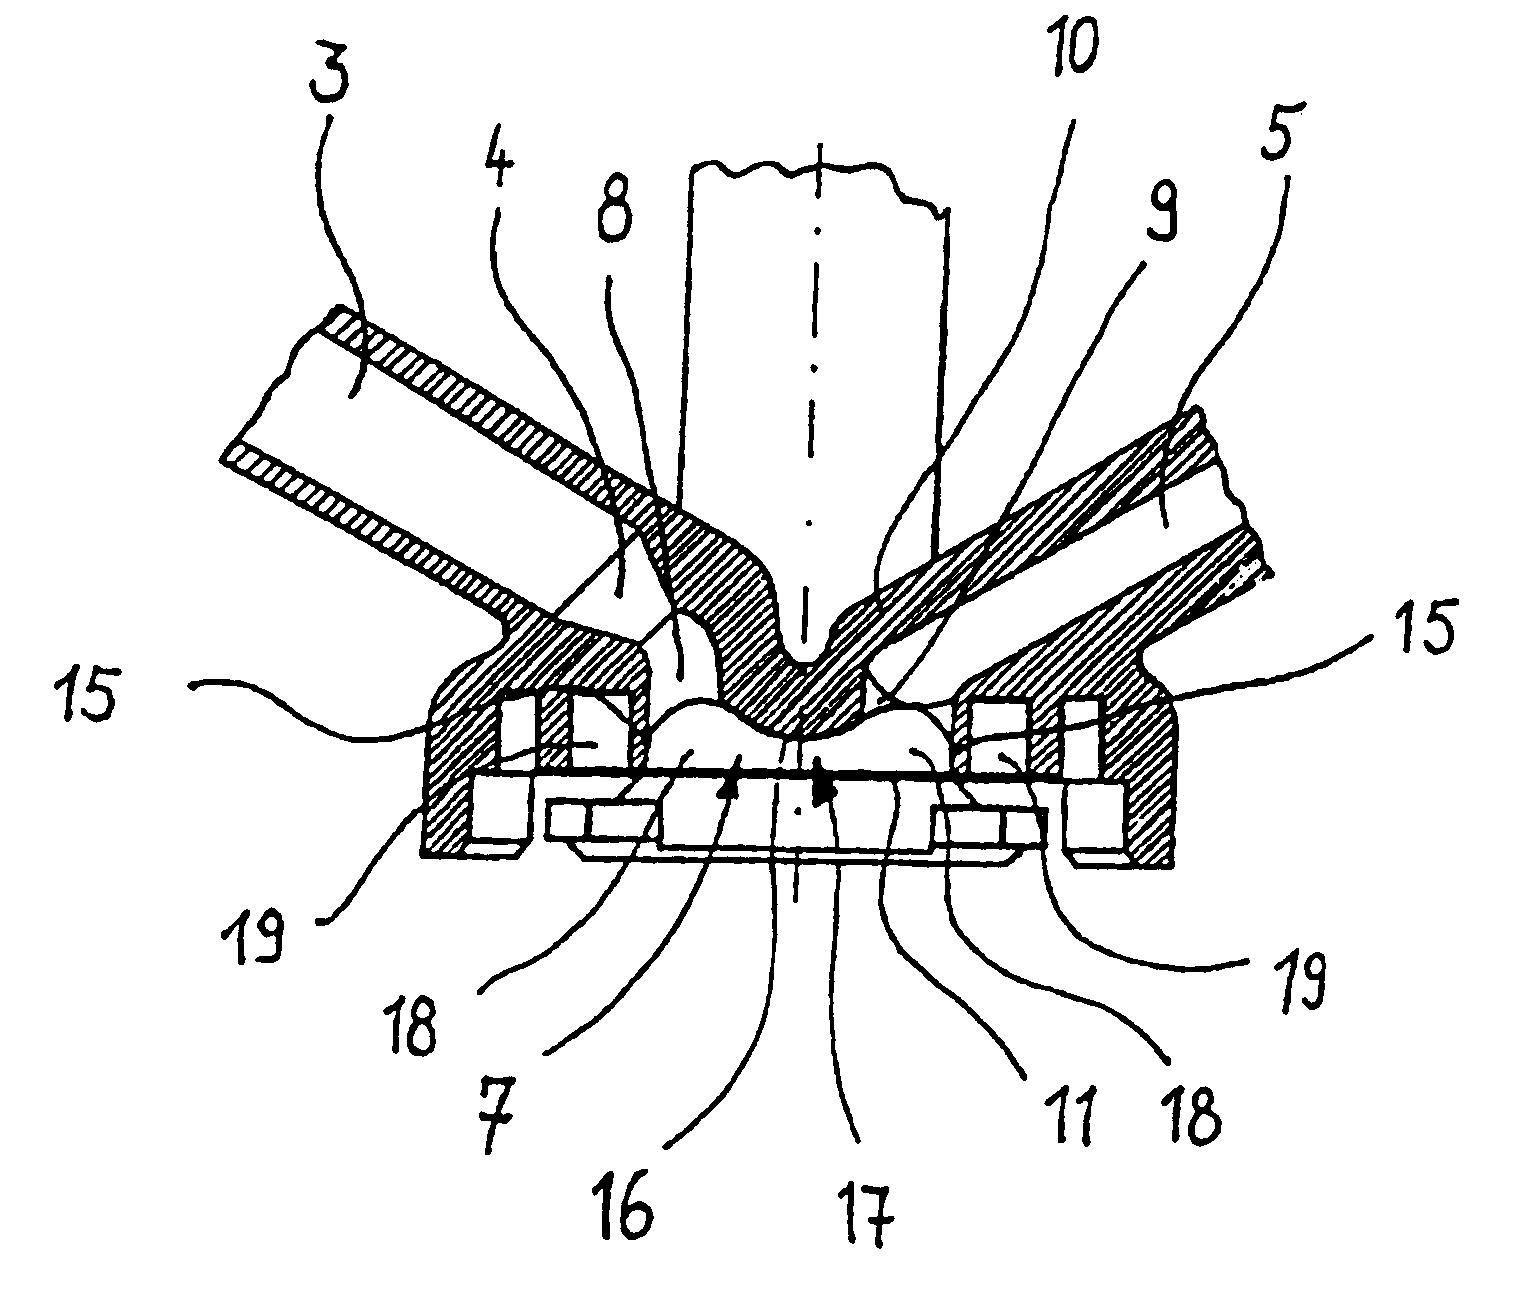 Pressure dome for connecting a transducer with a sealed fluid system